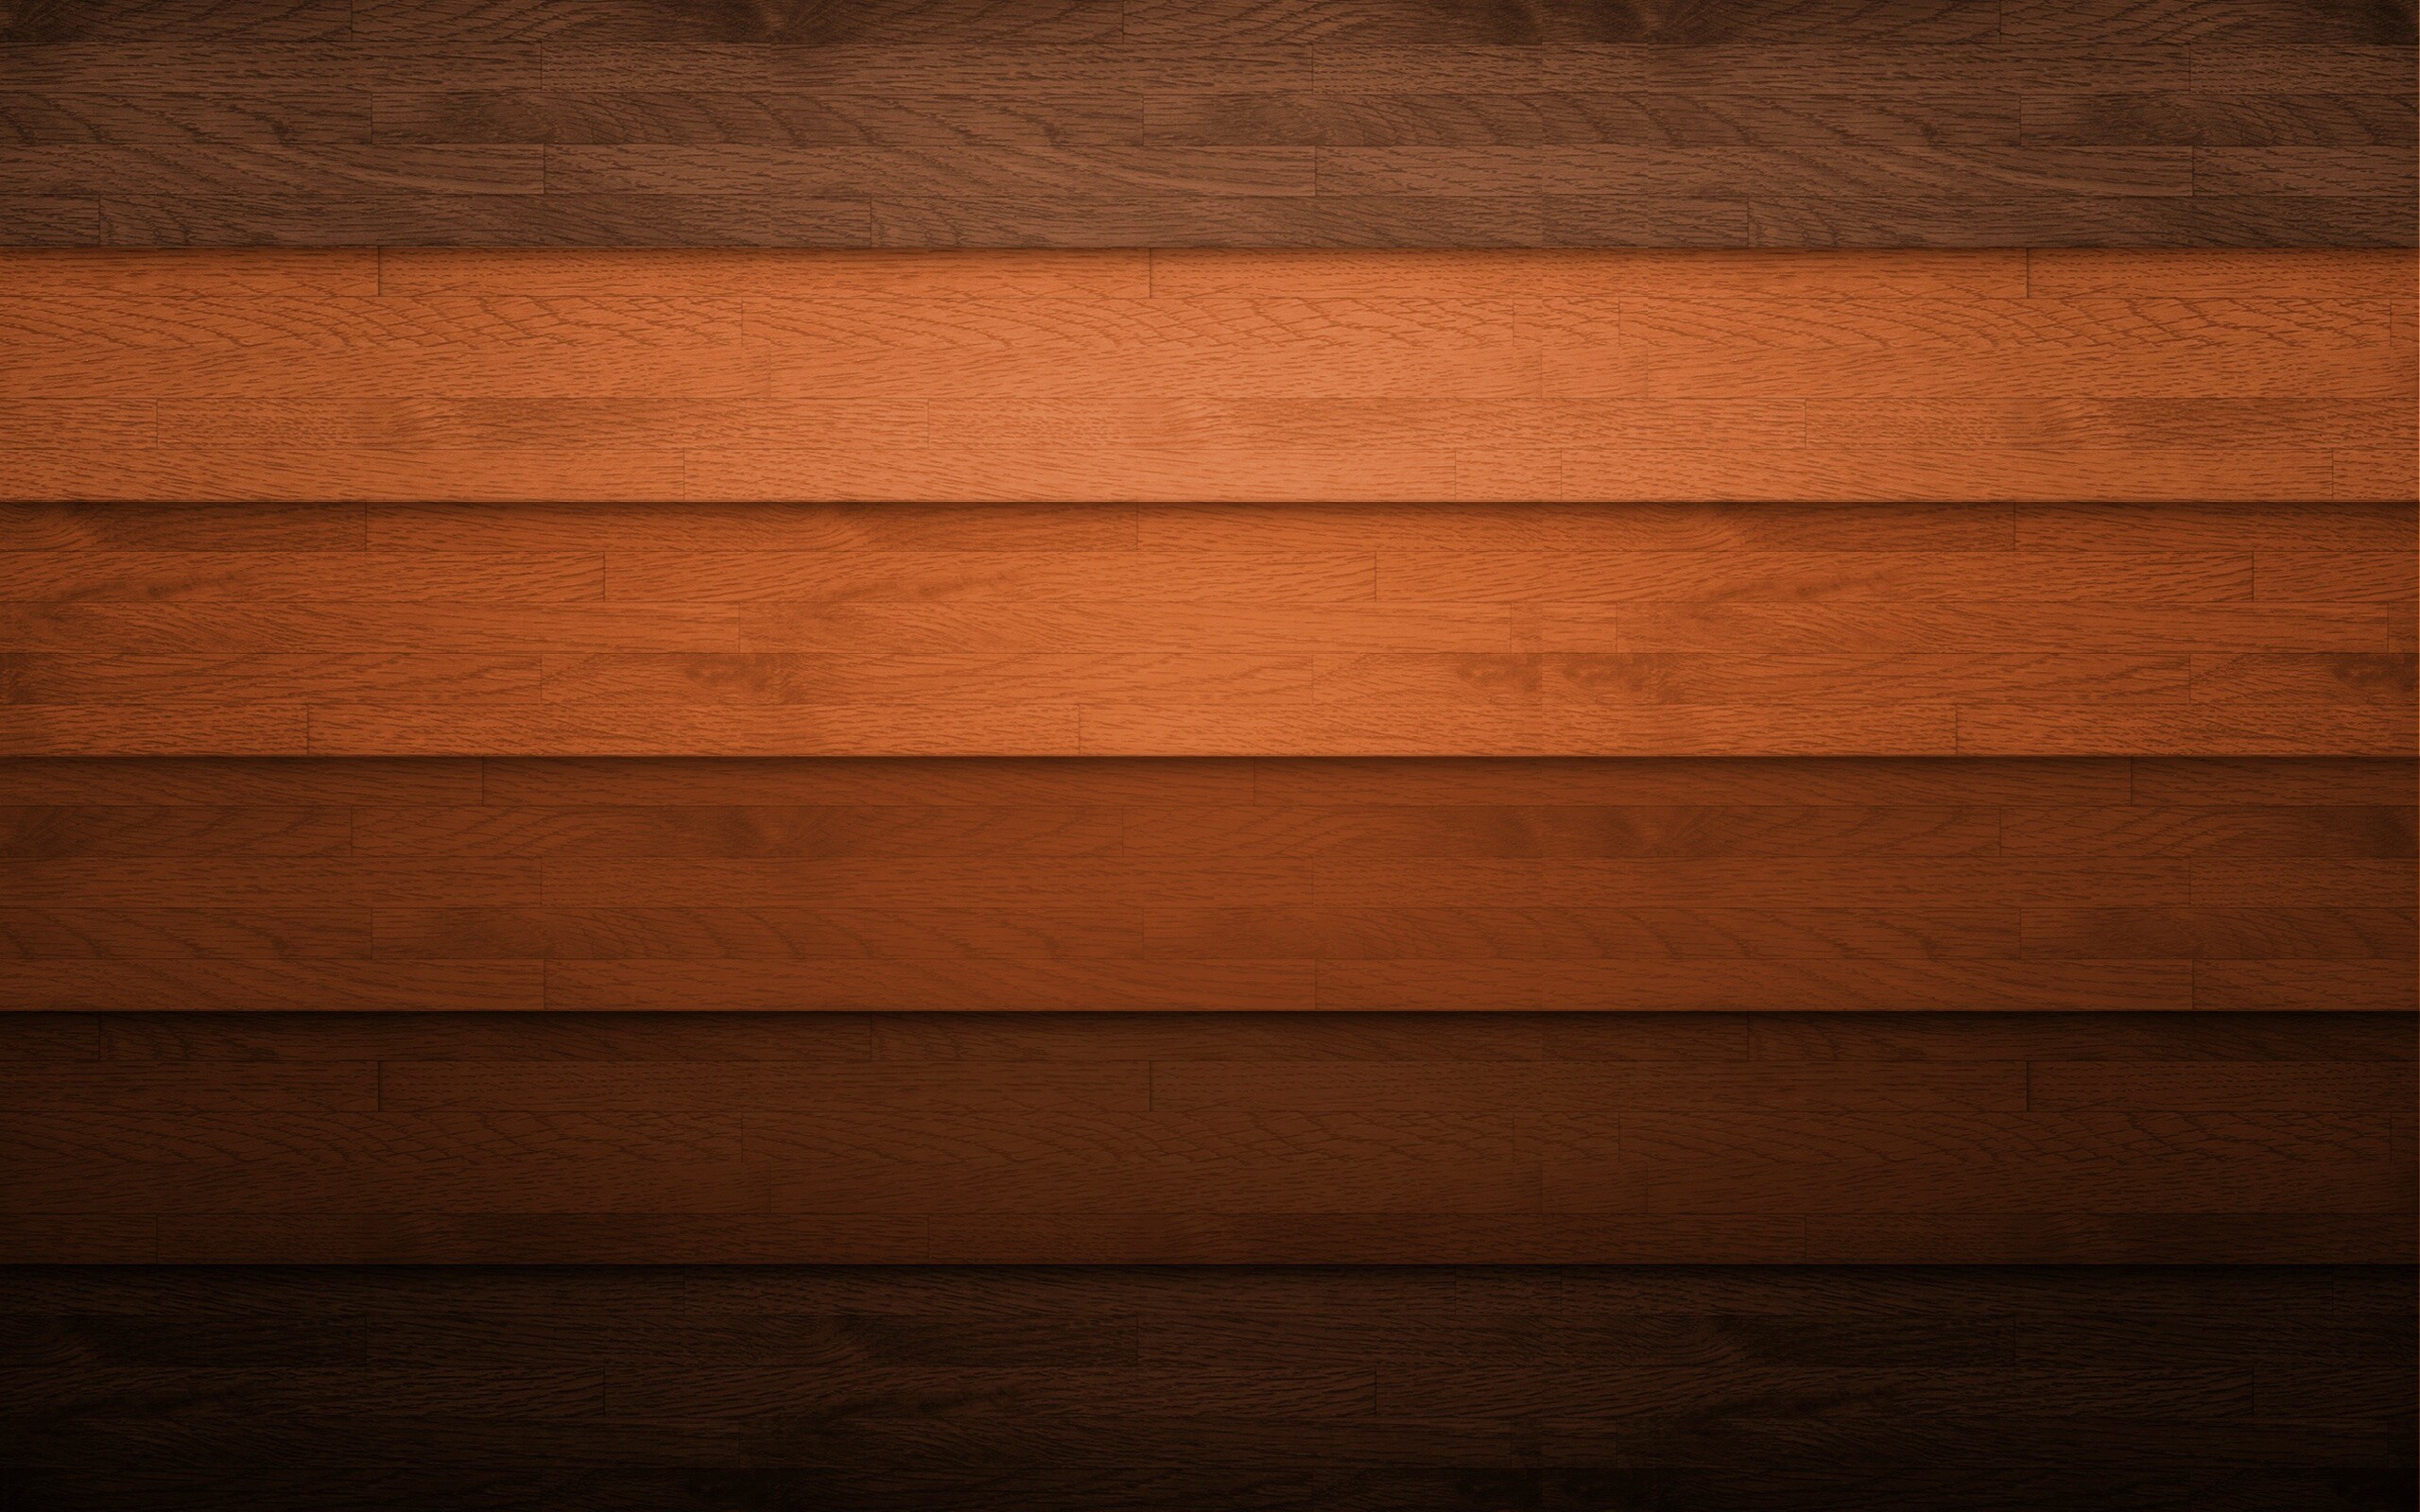 Download wallpapers multicolored wood texture, wood background, shades of  different colors of wood, different colors wooden plank concepts for  desktop with resolution 2560x1600. High Quality HD pictures wallpapers